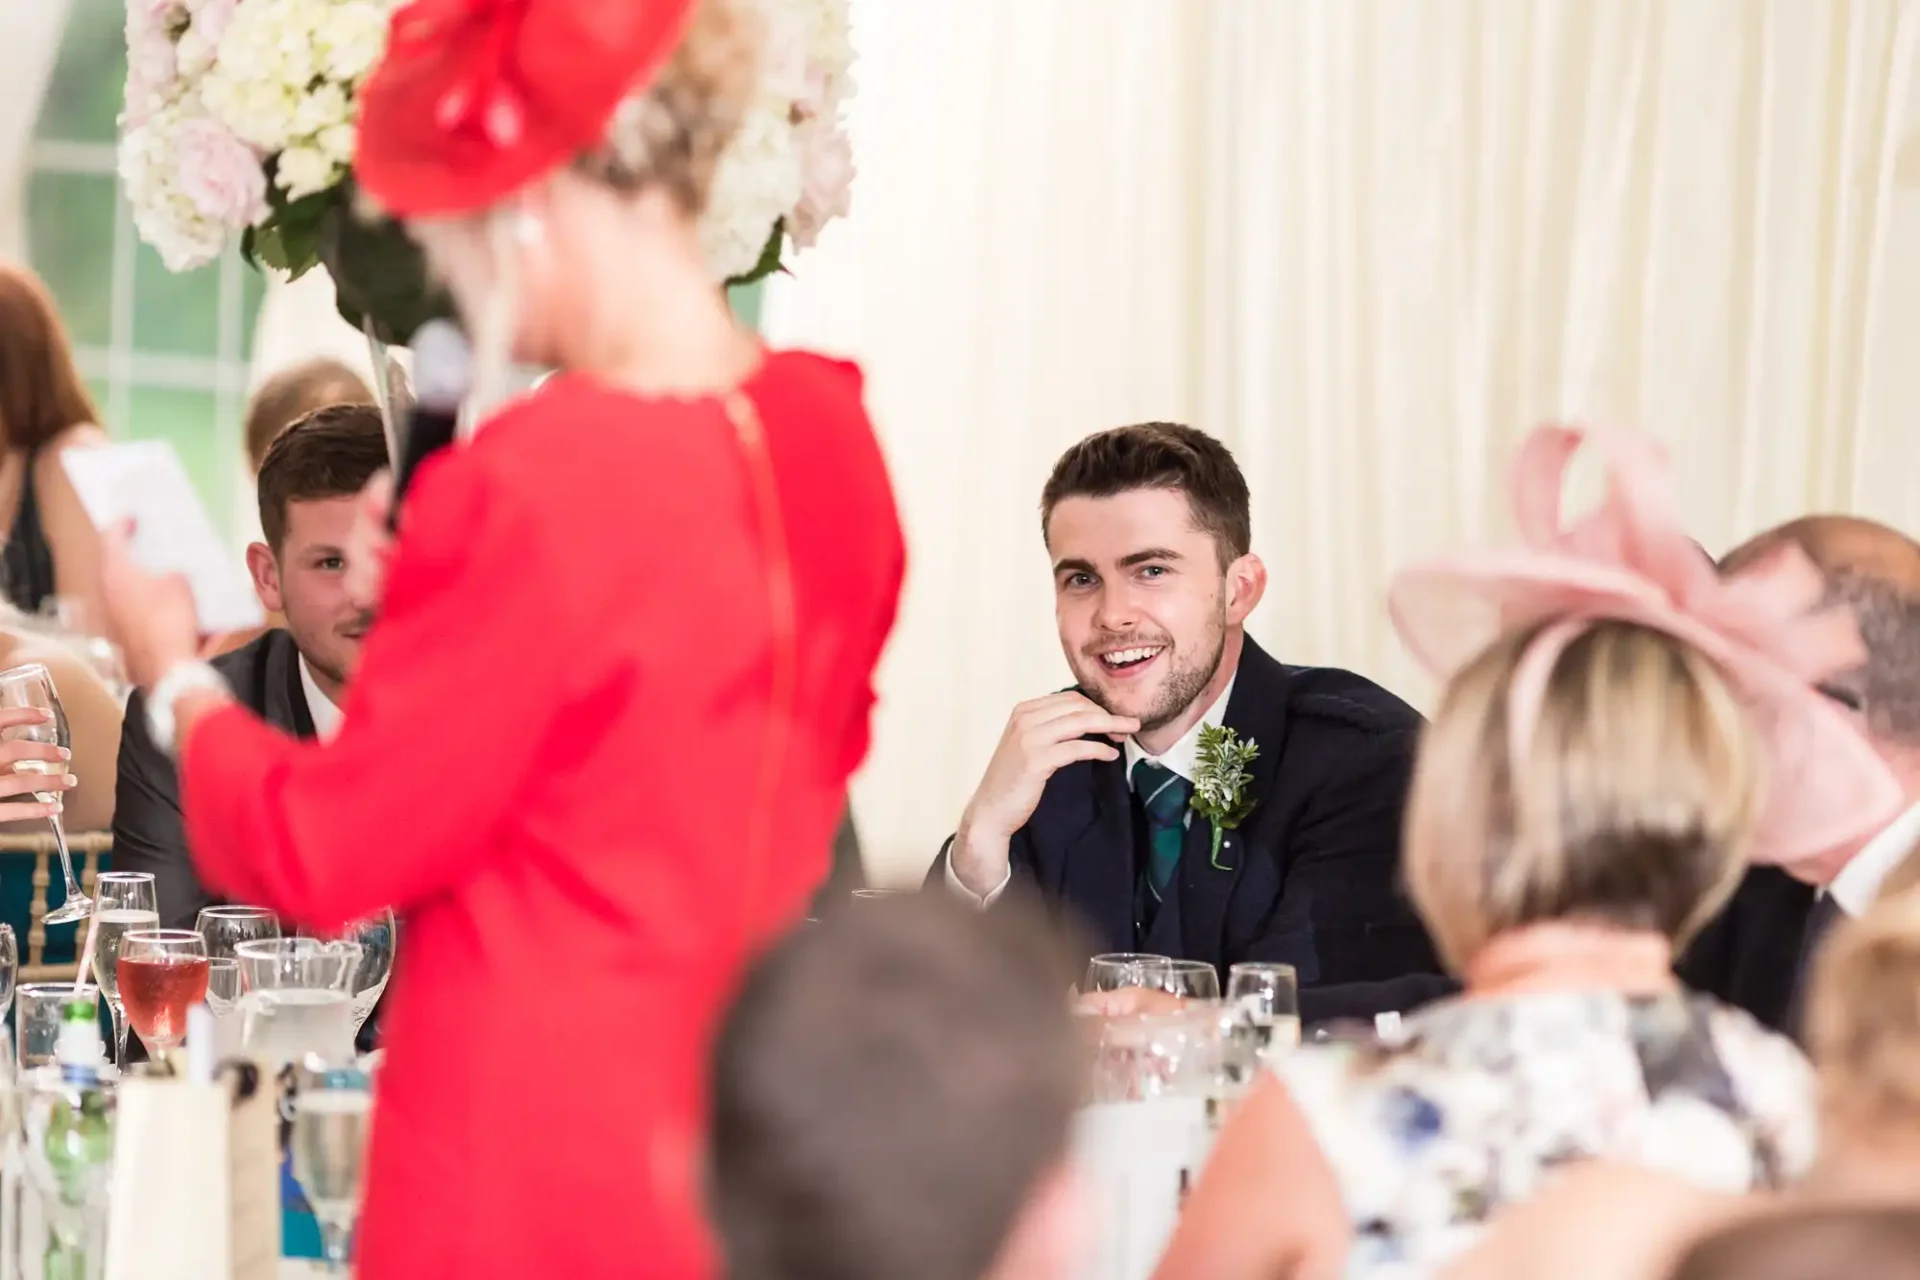 A man in a suit with a boutonniere smiling at a woman in a red dress at a wedding reception, with guests blurred in the background.